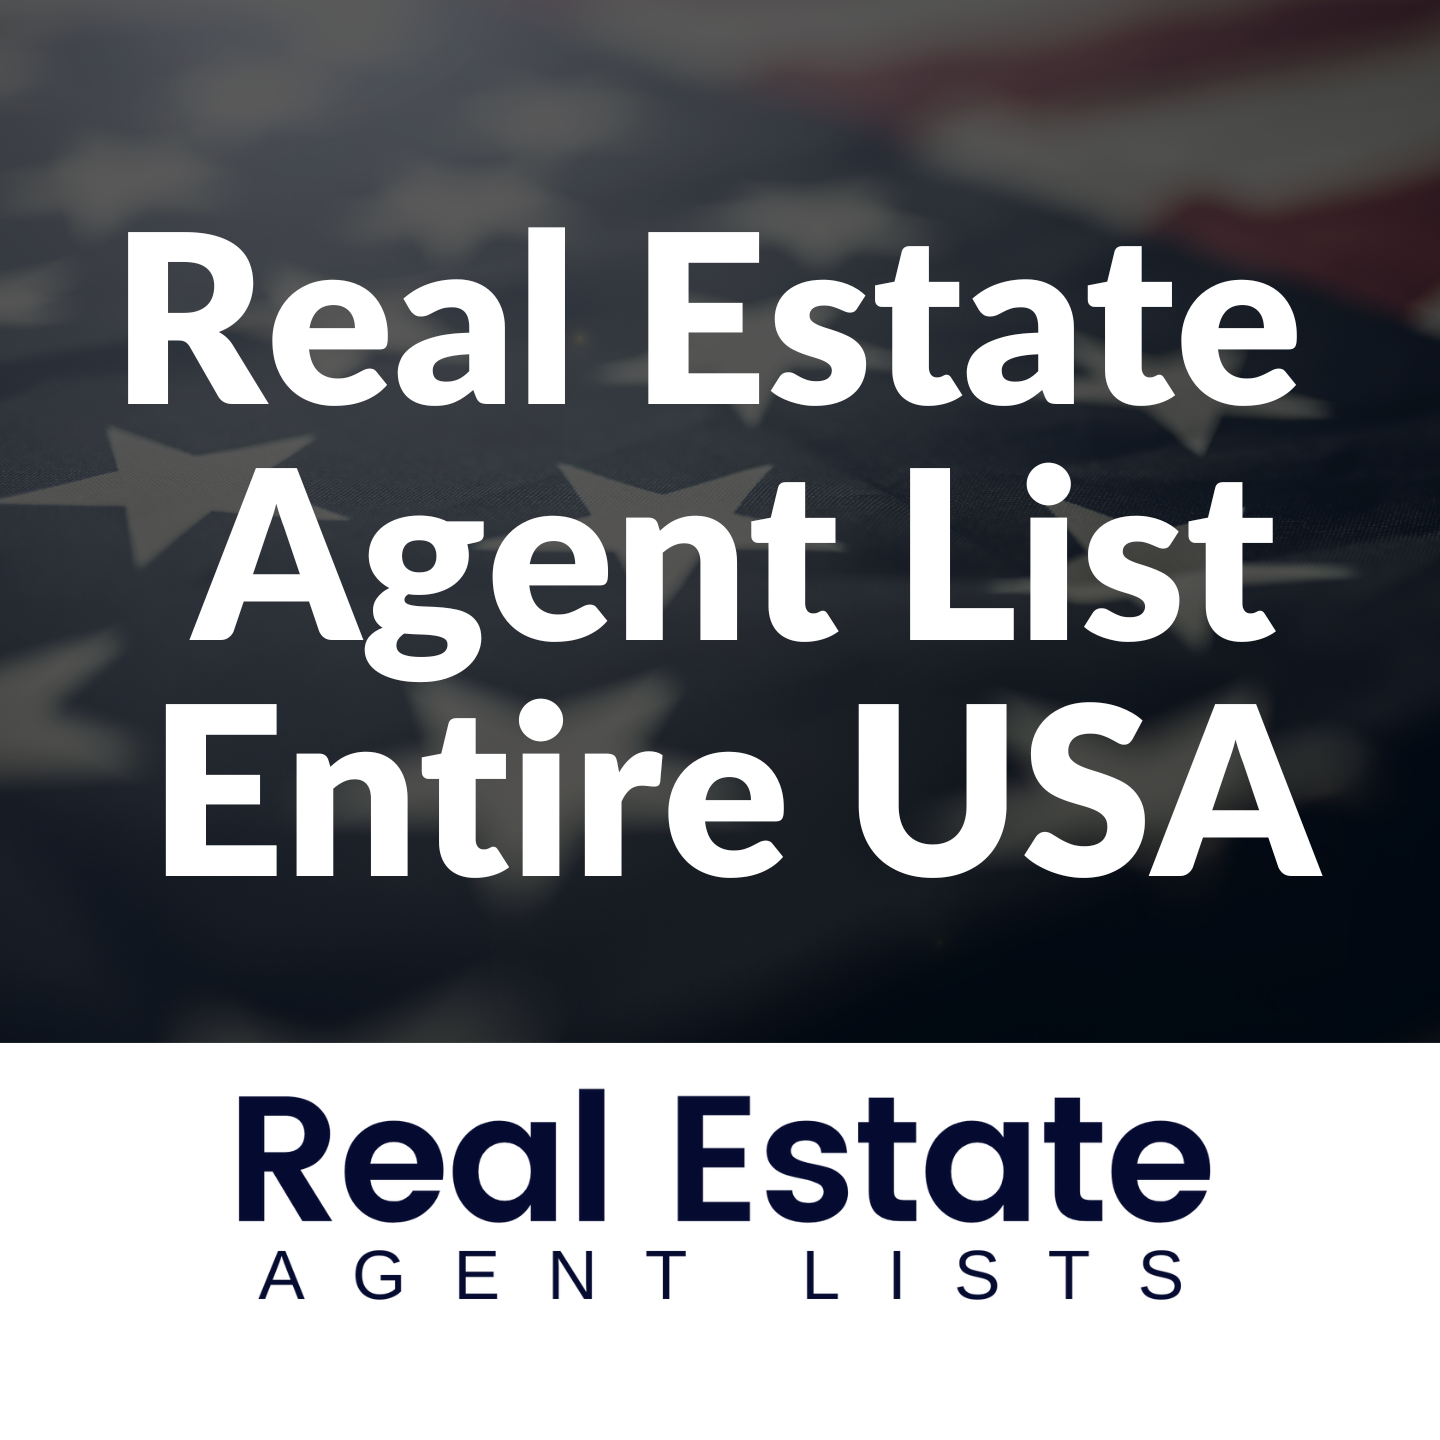 Entire Database of USA Real Estate Agents